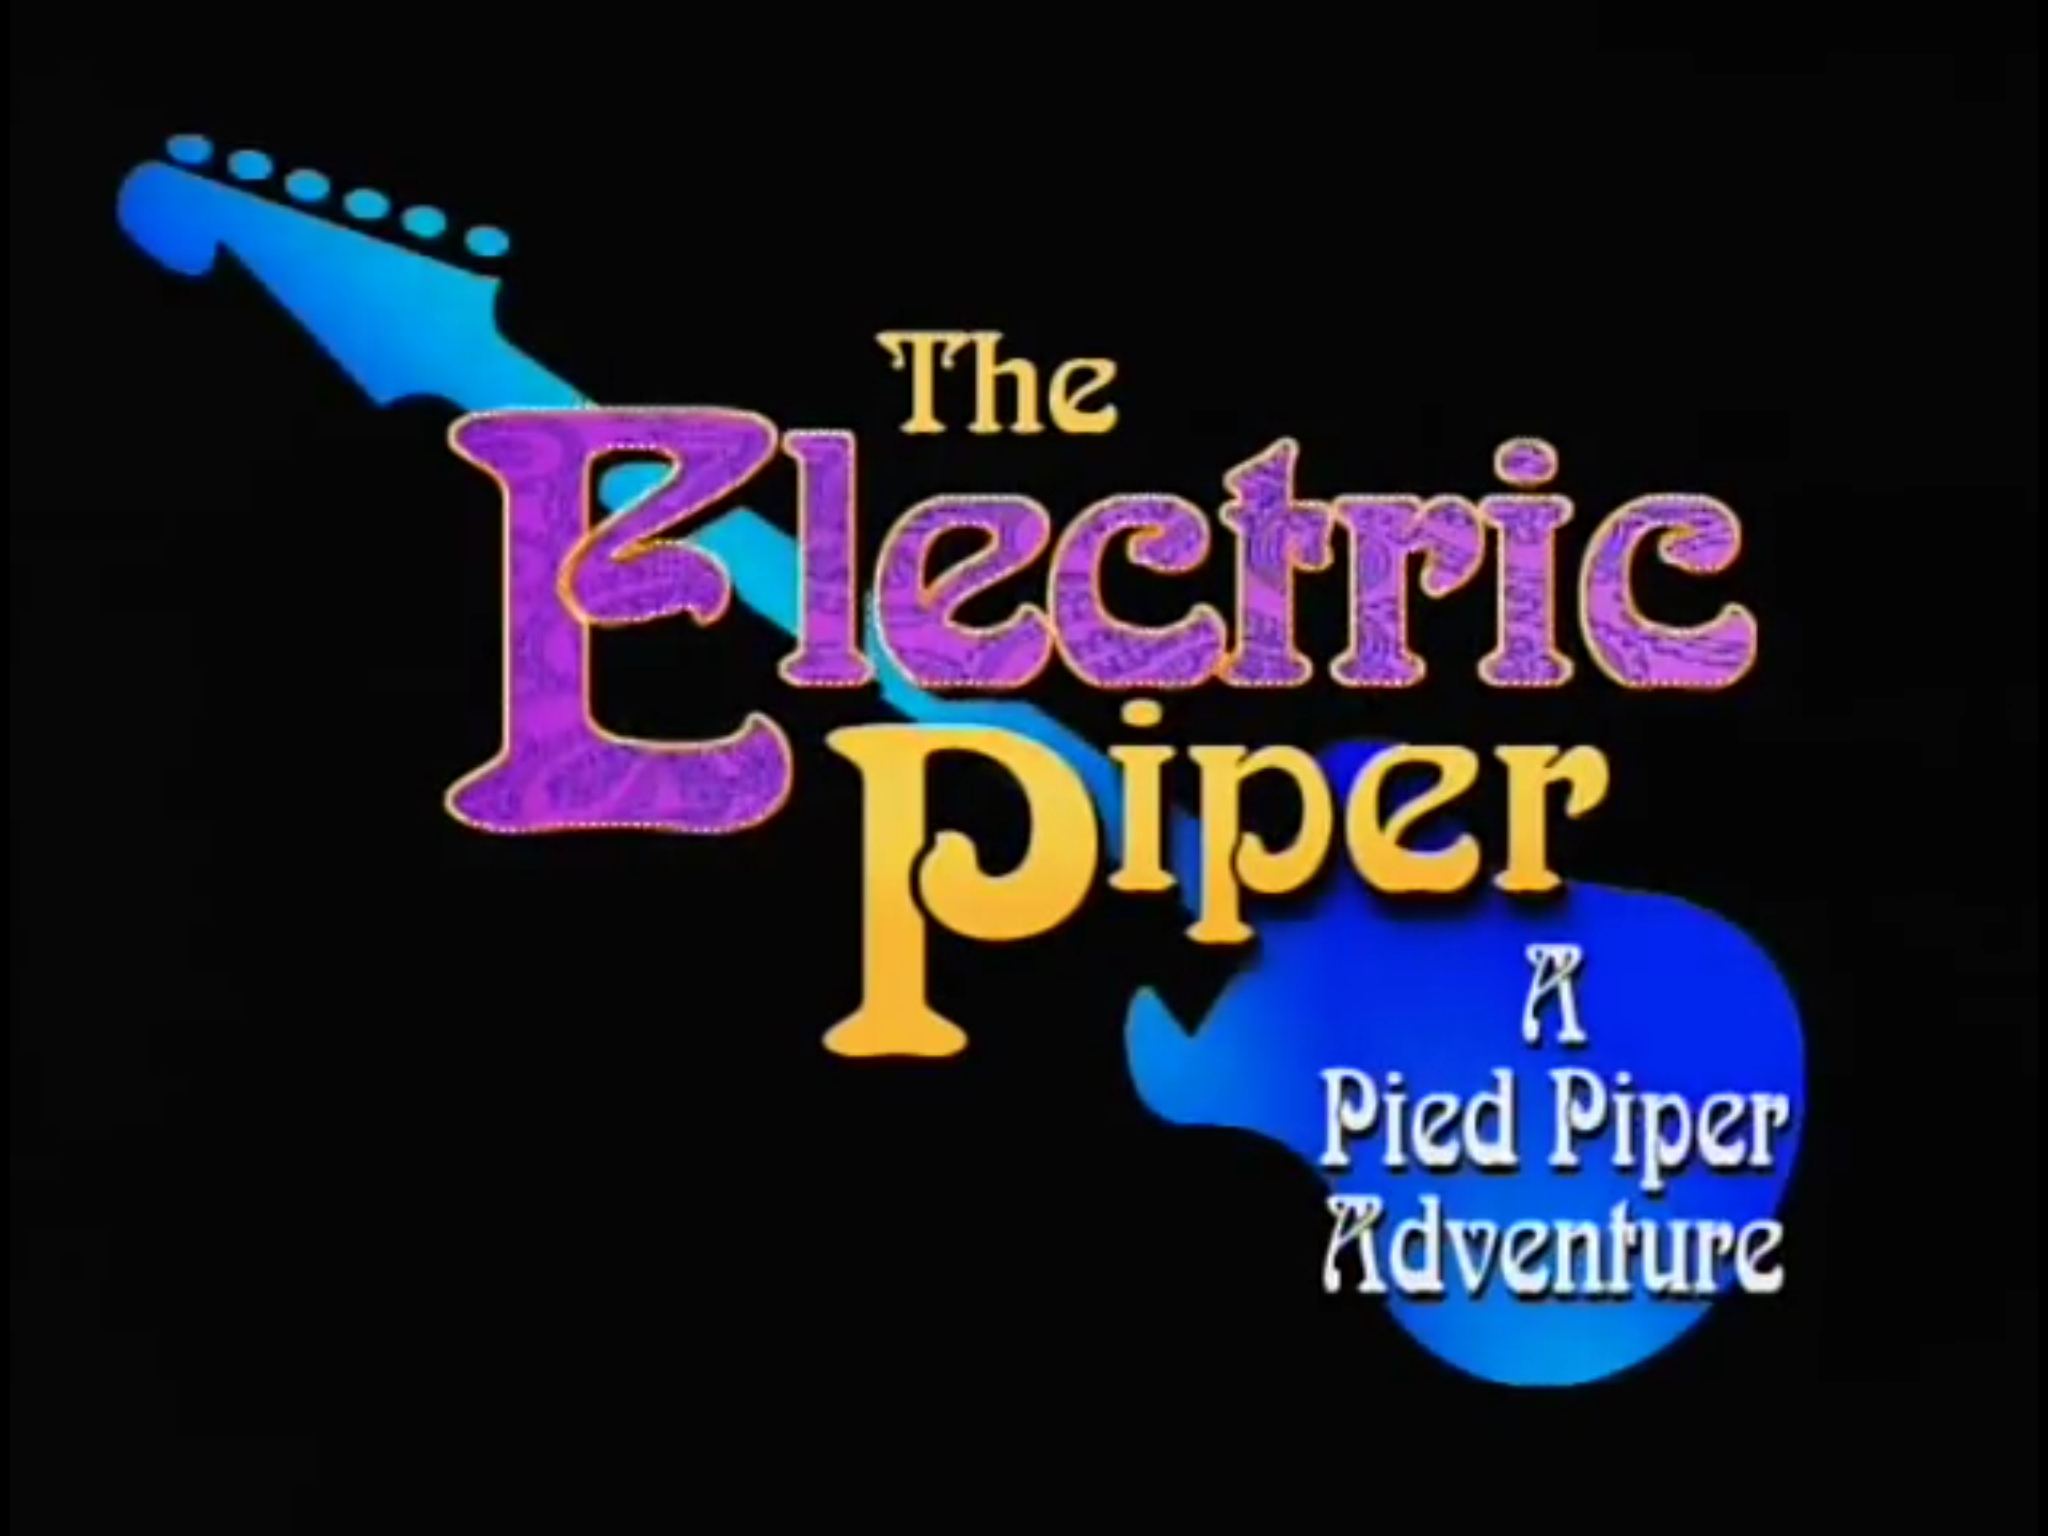 The electric piper title.png